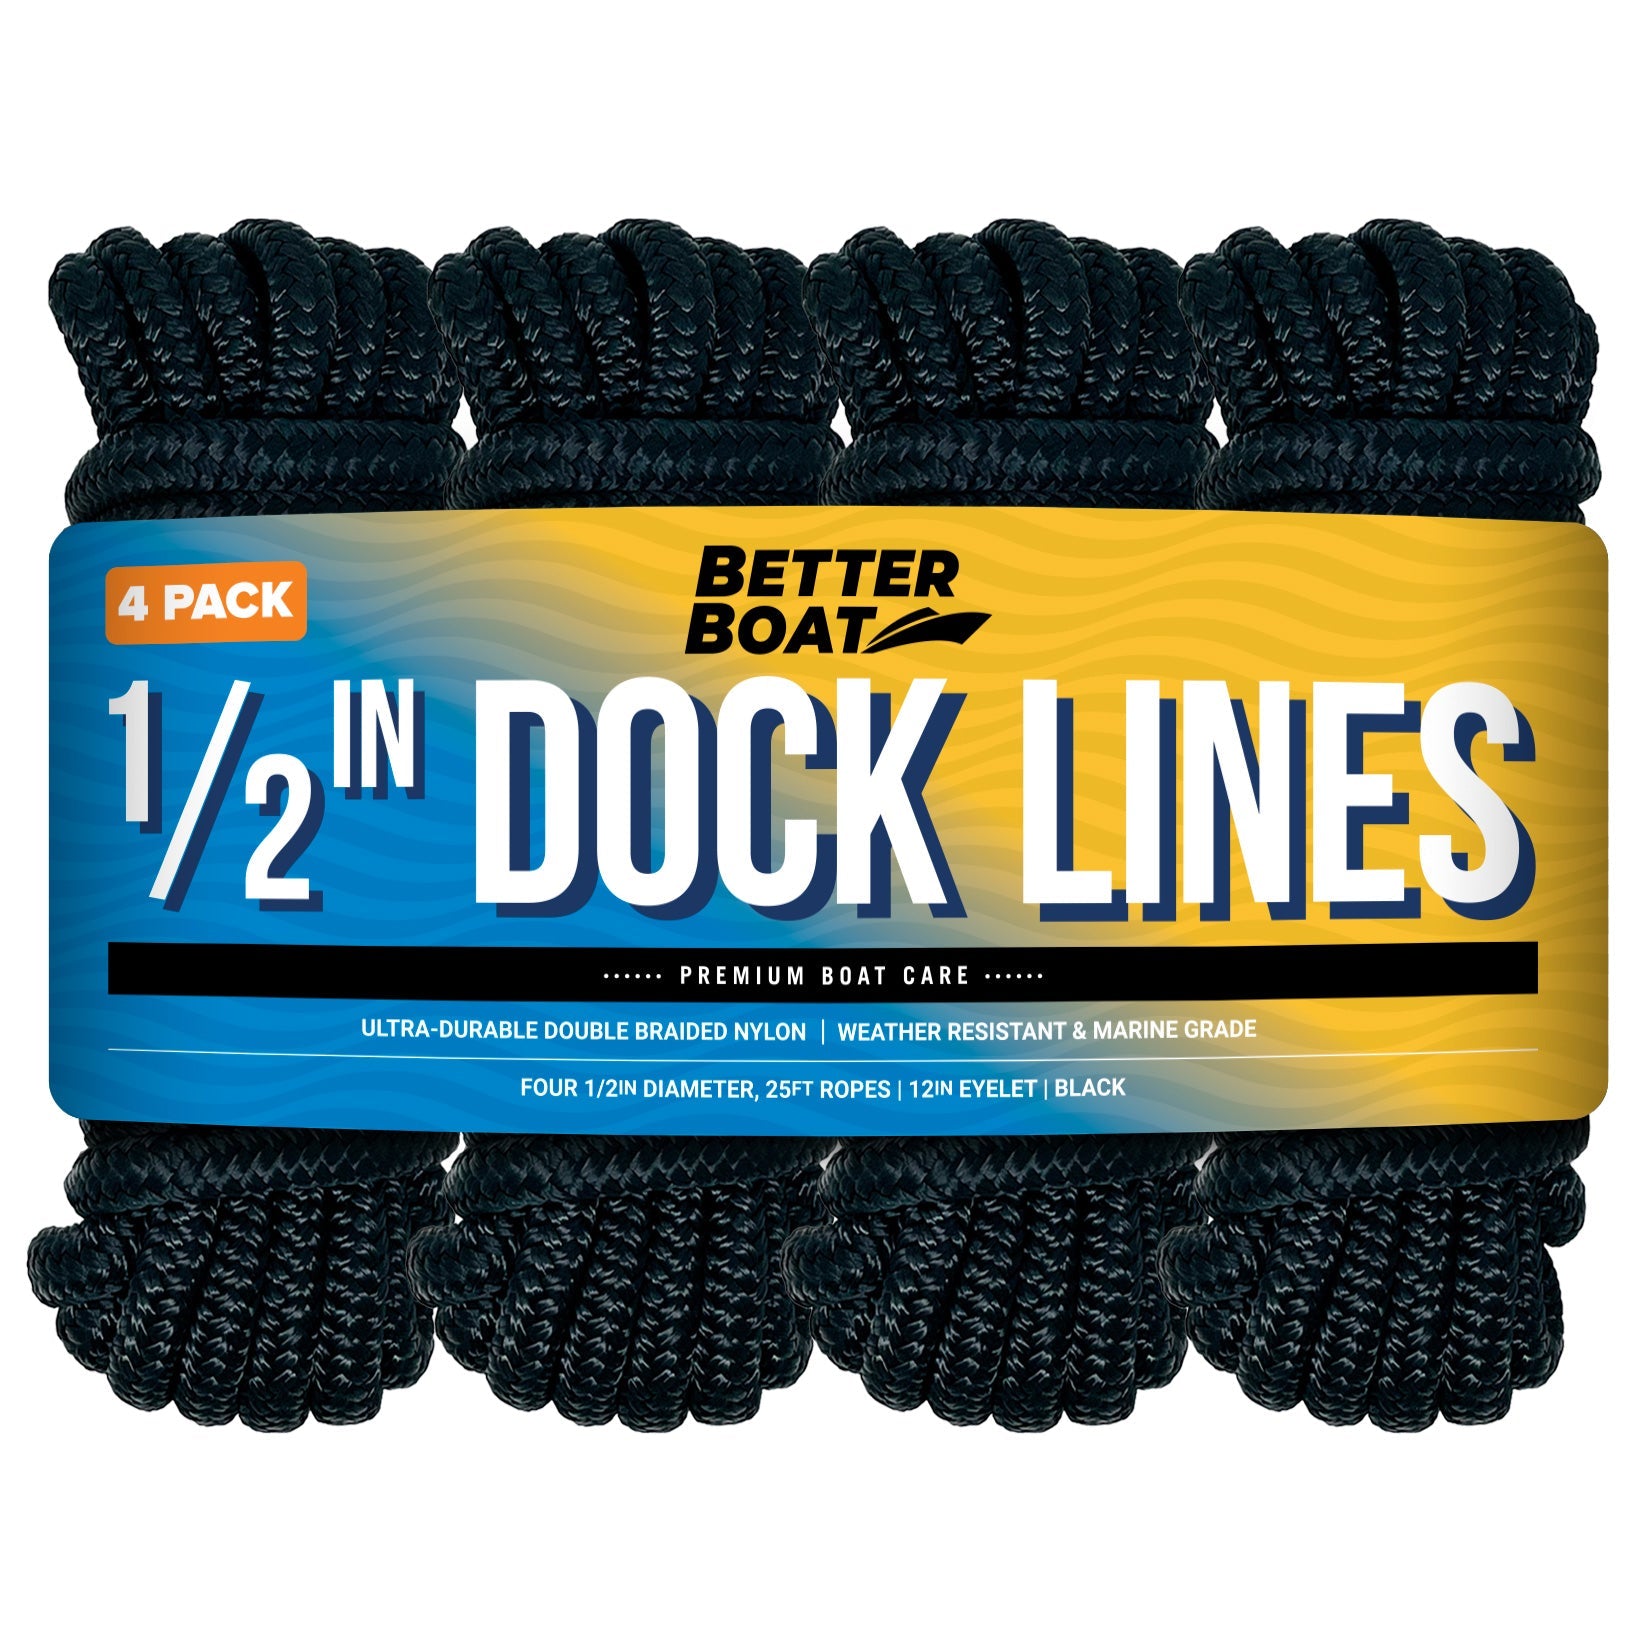 1/2 Inch Dock Lines  Double-Braided Nylon Dock Lines – Better Boat